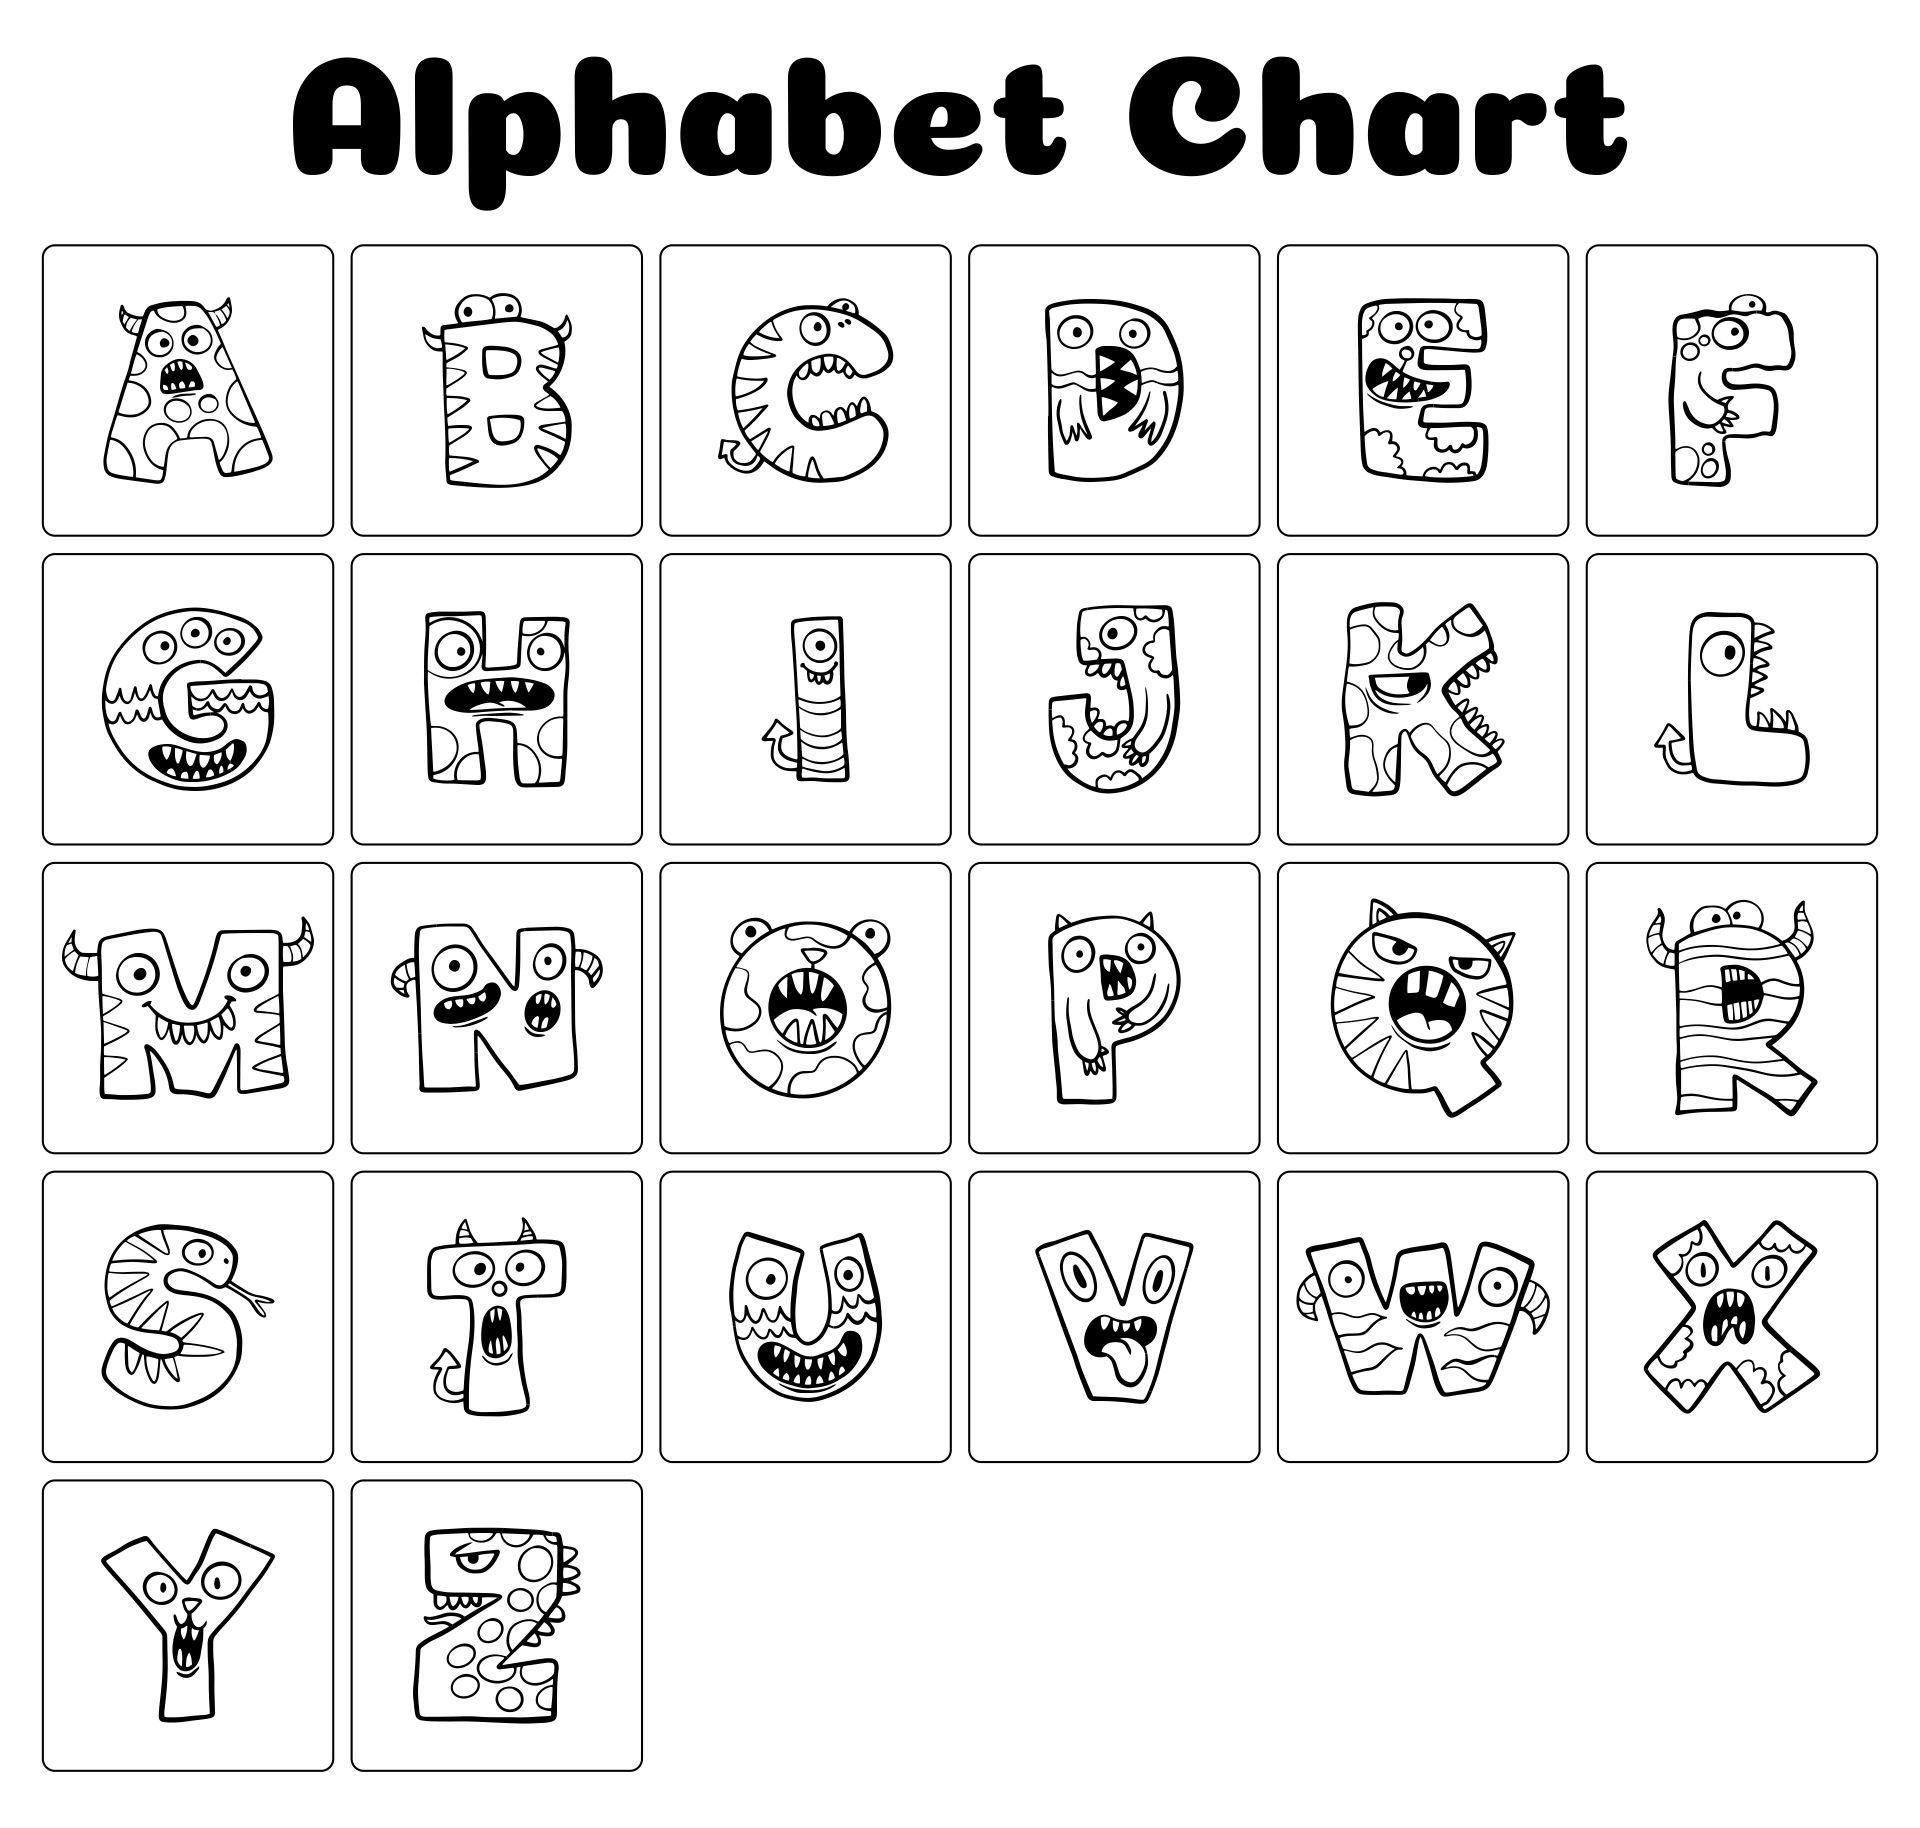 4-best-images-of-chart-full-page-alphabet-abc-printable-10-best